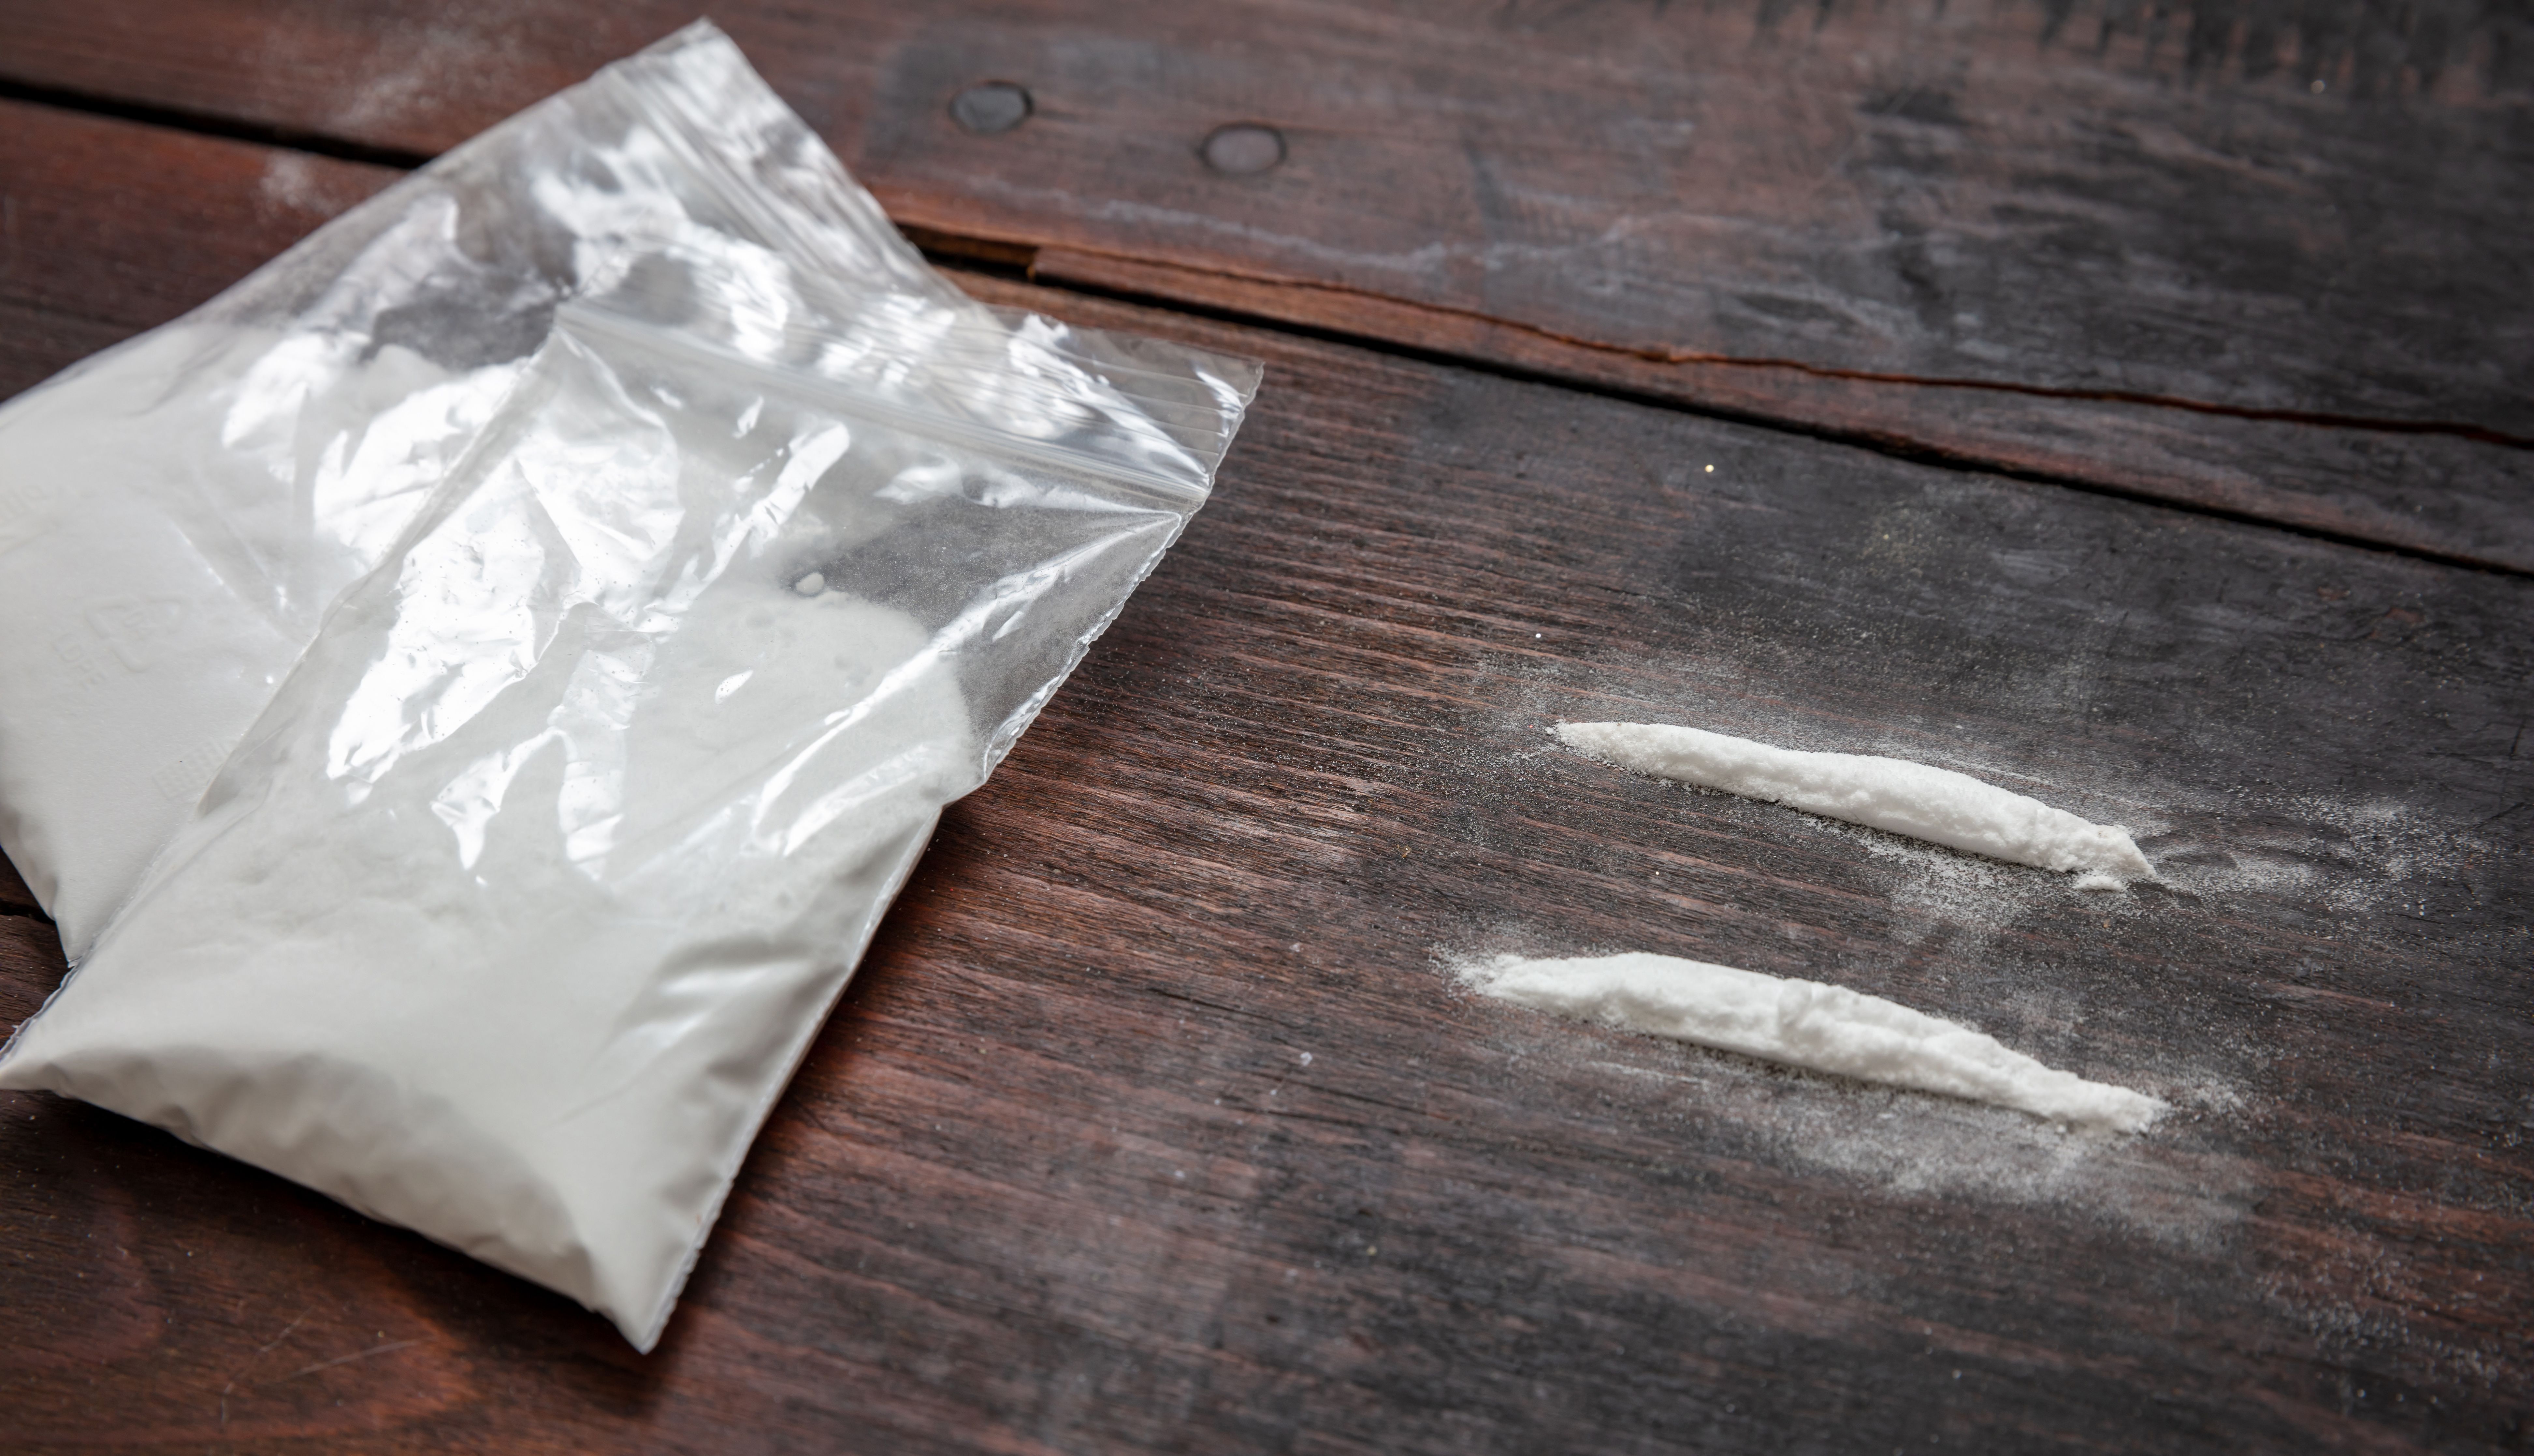 Cocaine Plastic Packets And Two Lines On Wooden Ta 2021 09 04 15 51 40 Utc